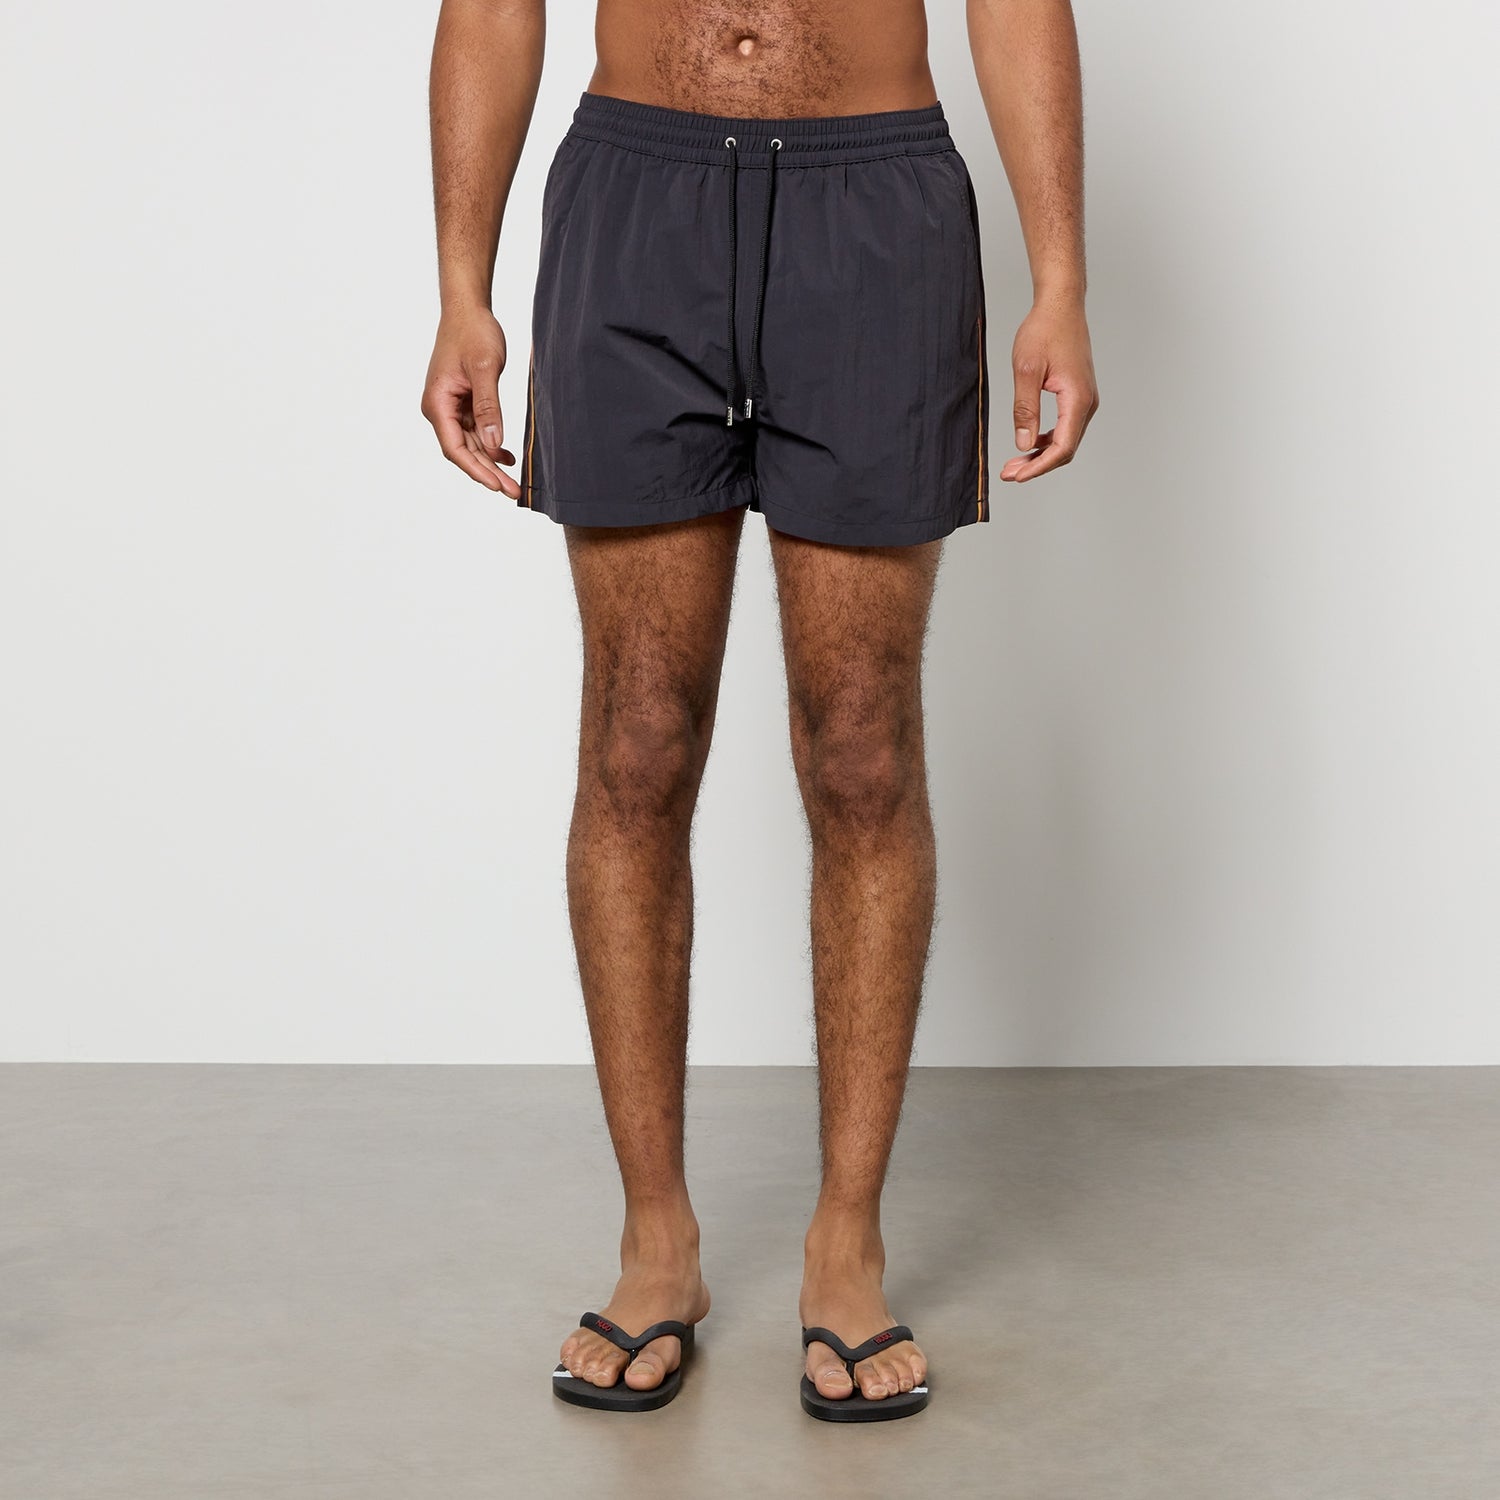 Paul Smith Stripe Recycled Shell Swimming Shorts - XL